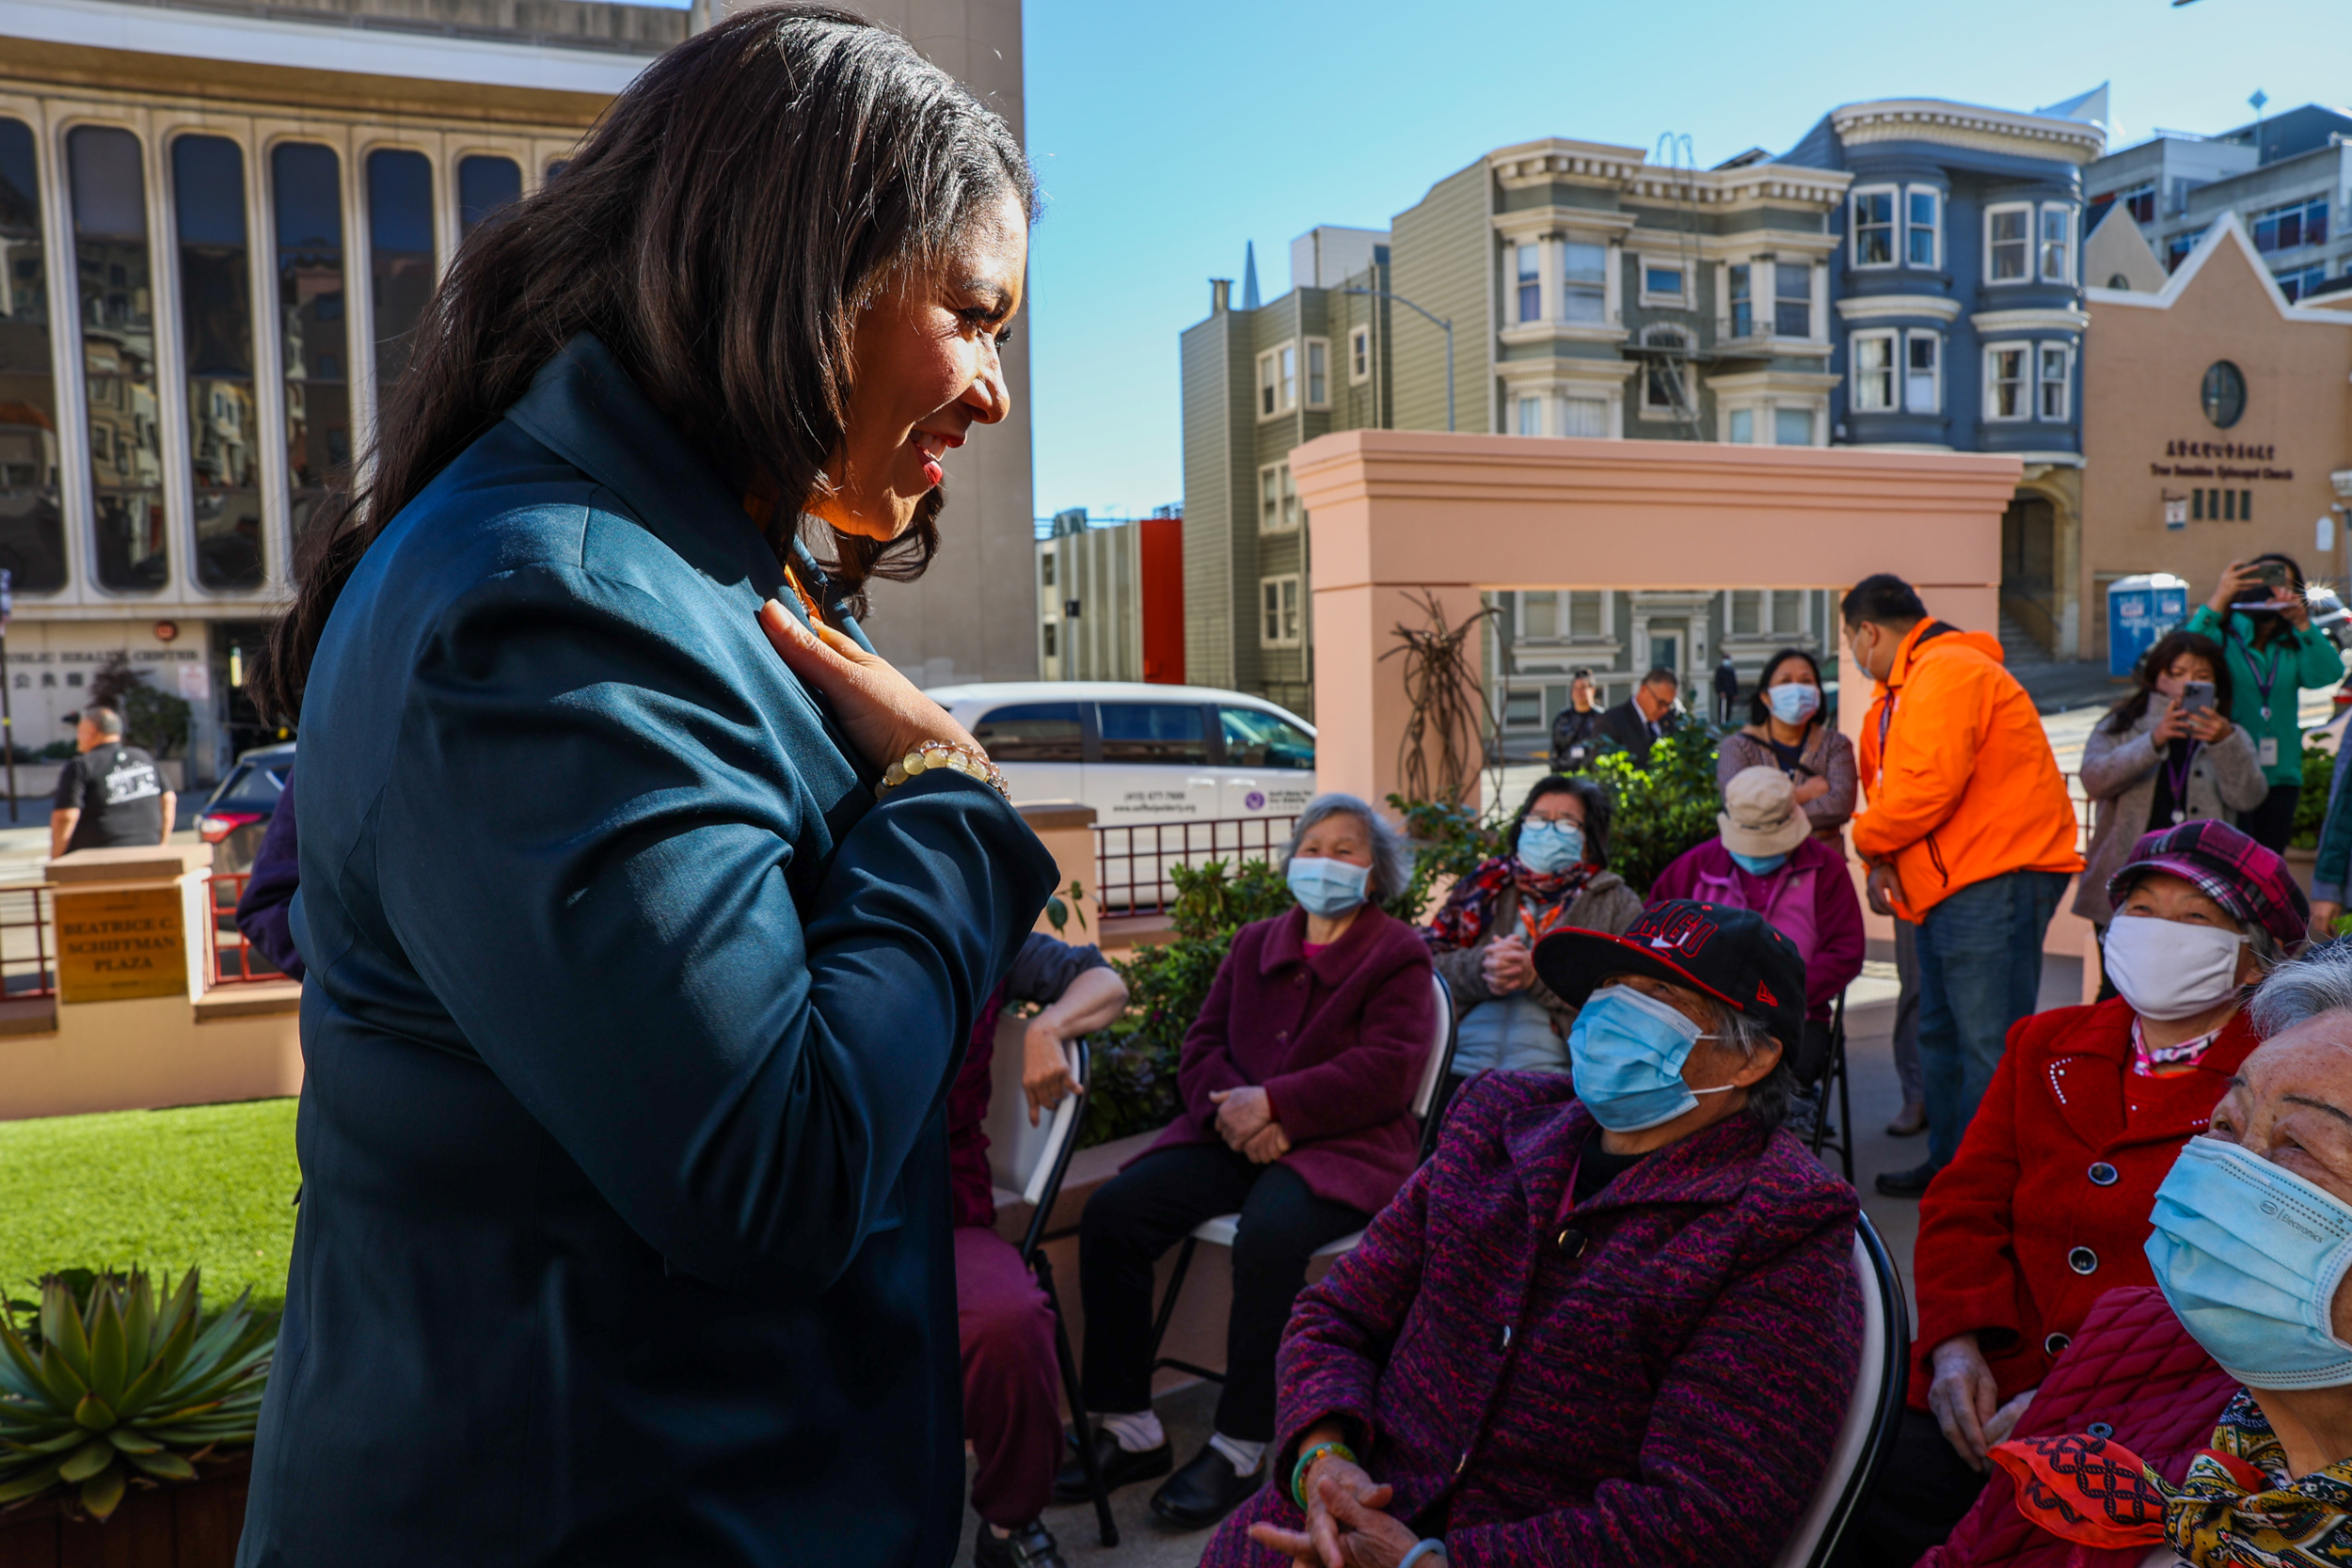 A woman gestures while speaking to seated, masked elderly individuals outdoors. Urban setting, sunny day.